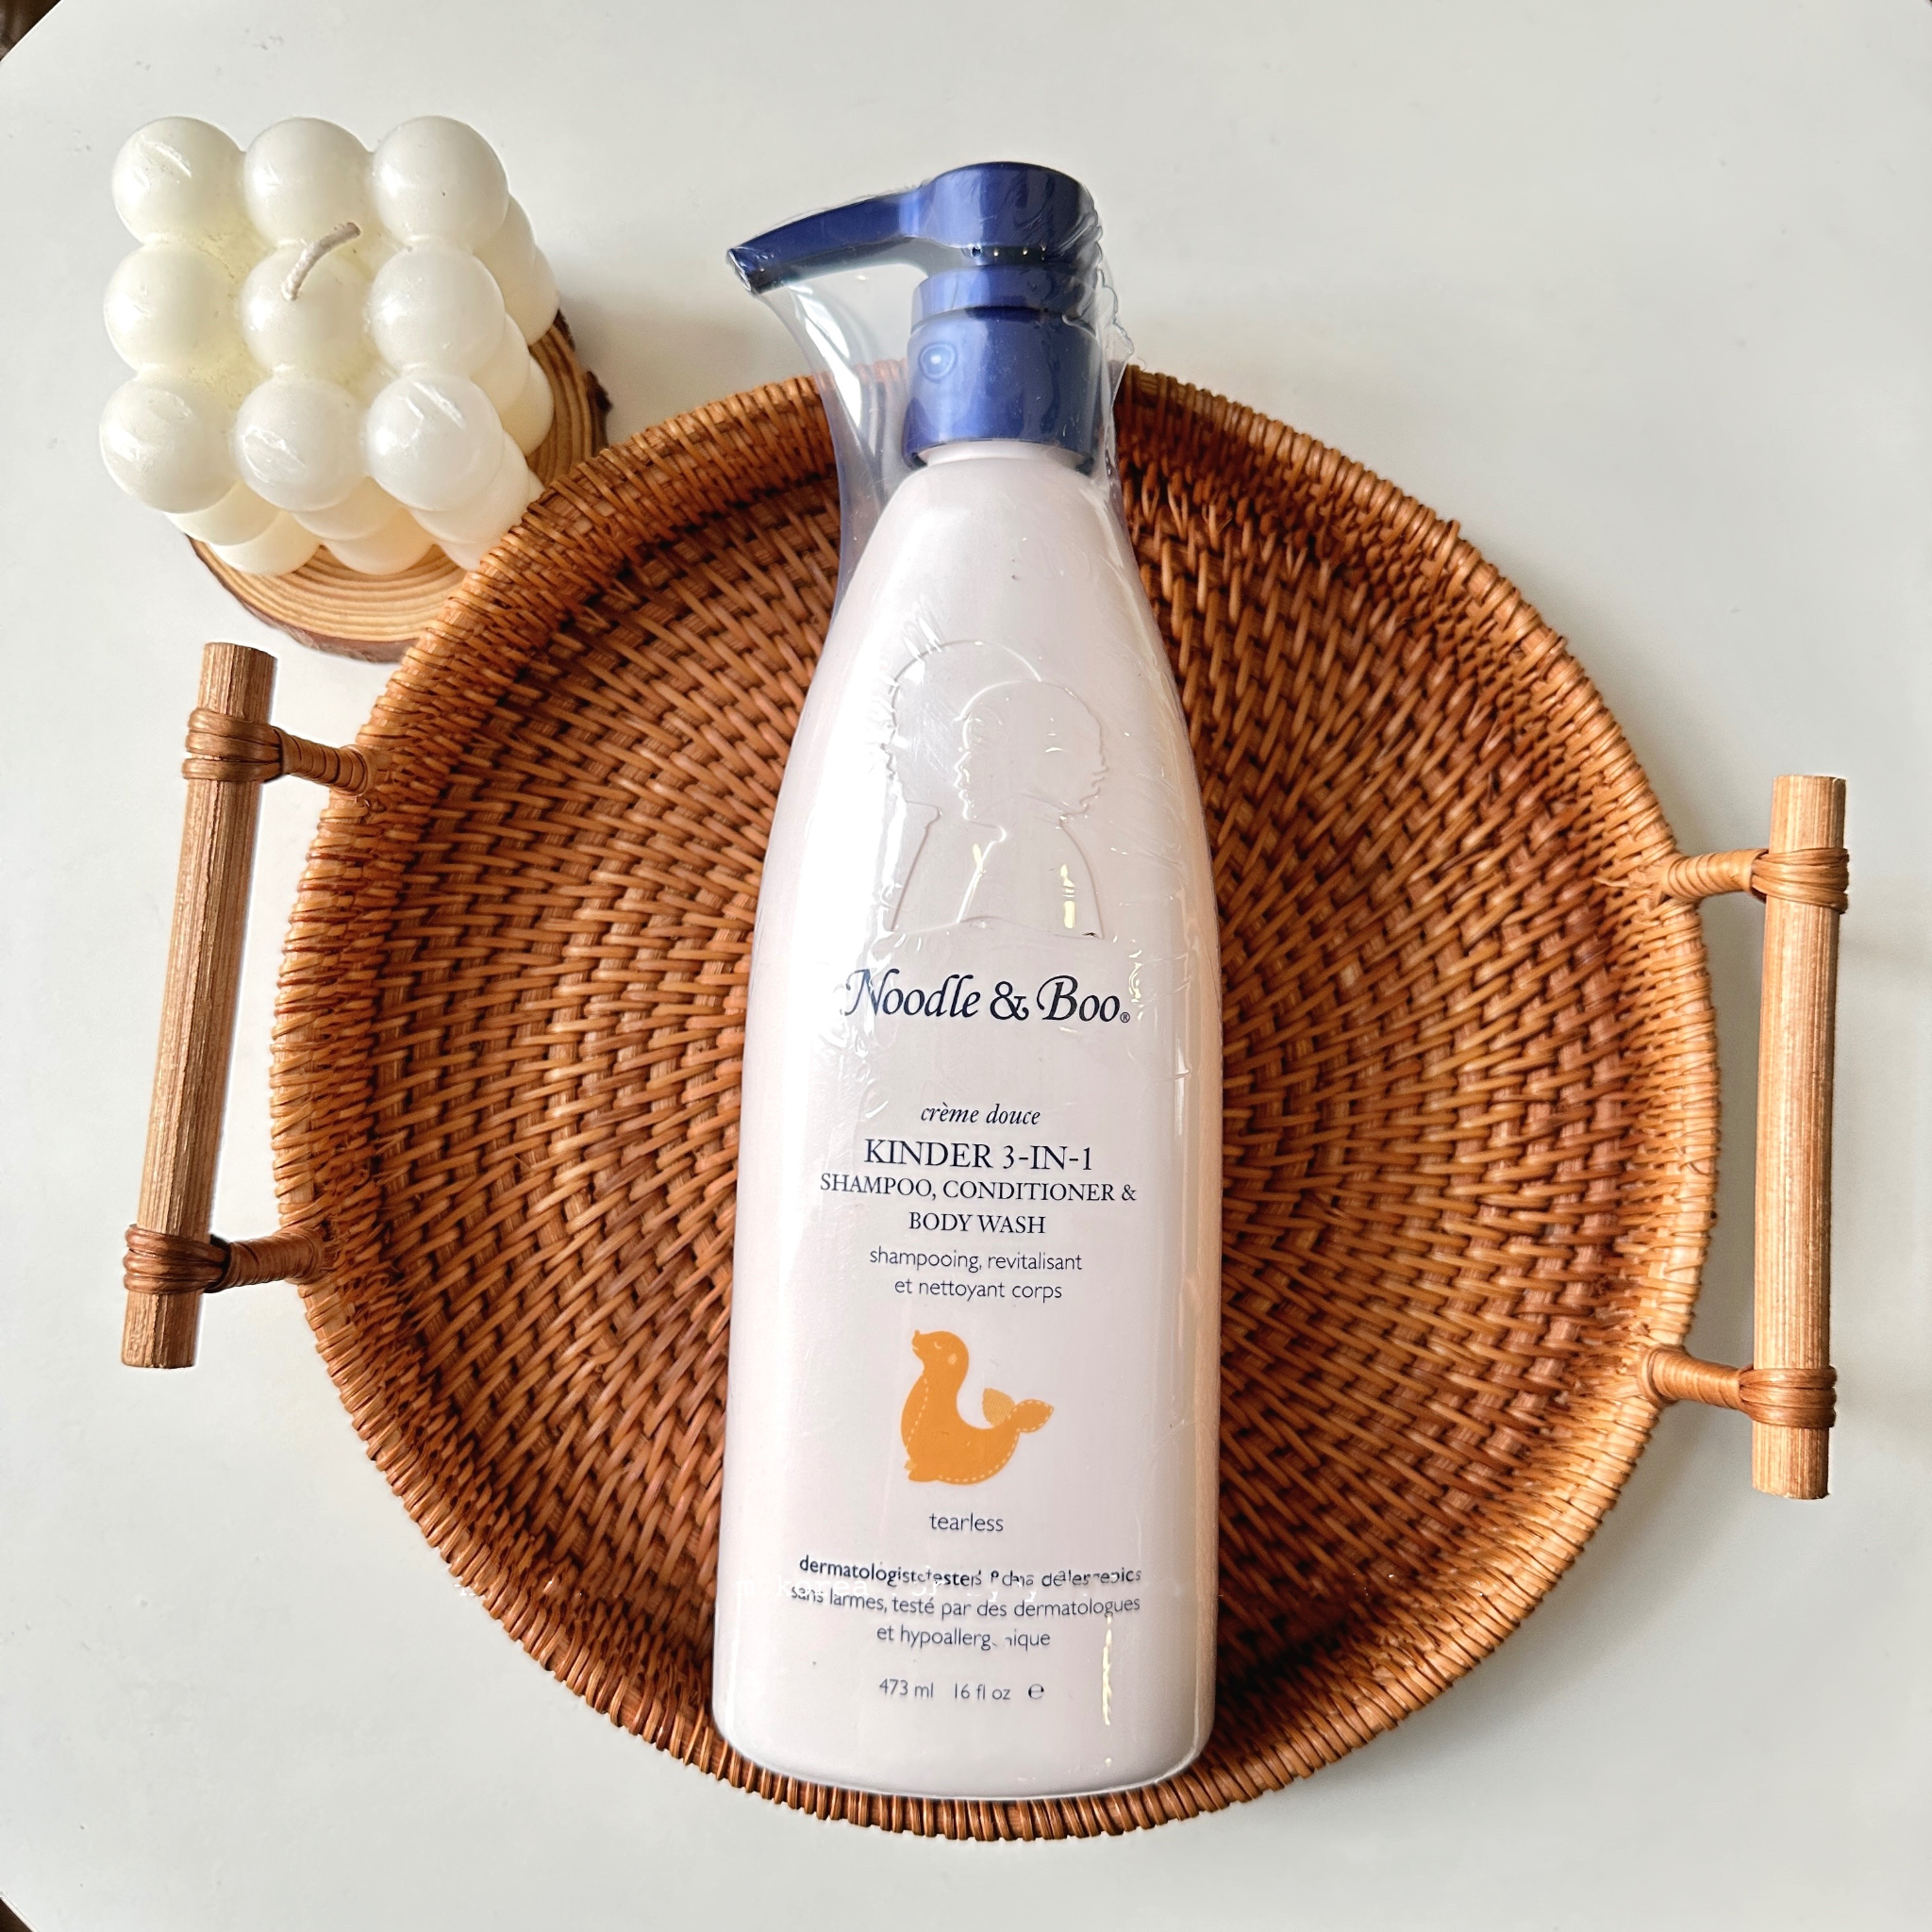  Sữa tắm gội Noodle & Boo Kinder 3-in-1 Shampoo, Conditioner & Body Wash for Baby 